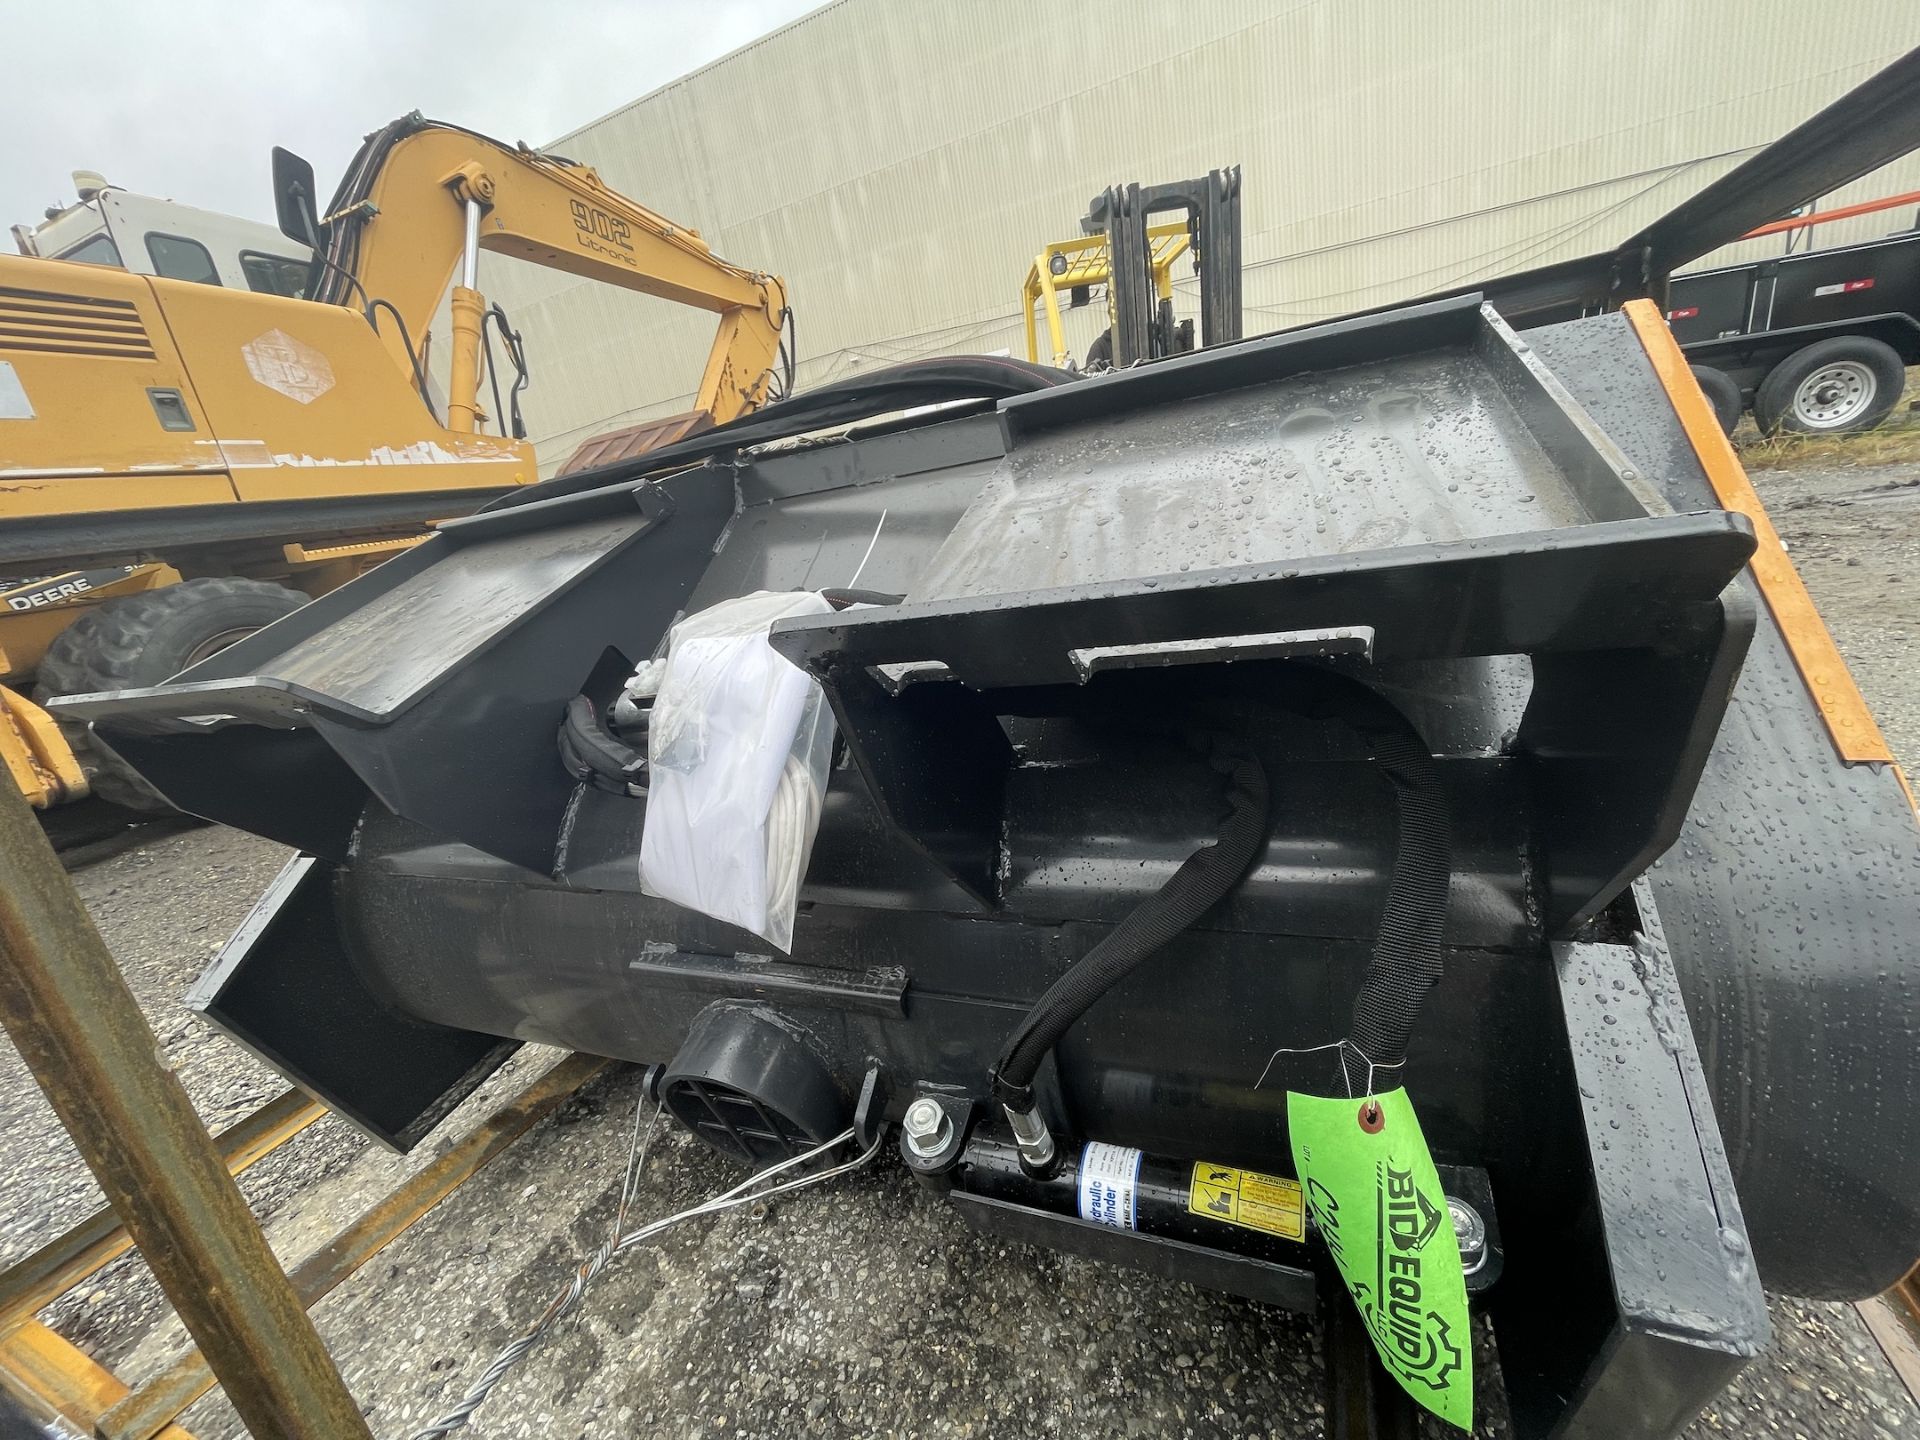 New Wolverine Skid Steer Mixing Bucket (C244E) - Image 5 of 10